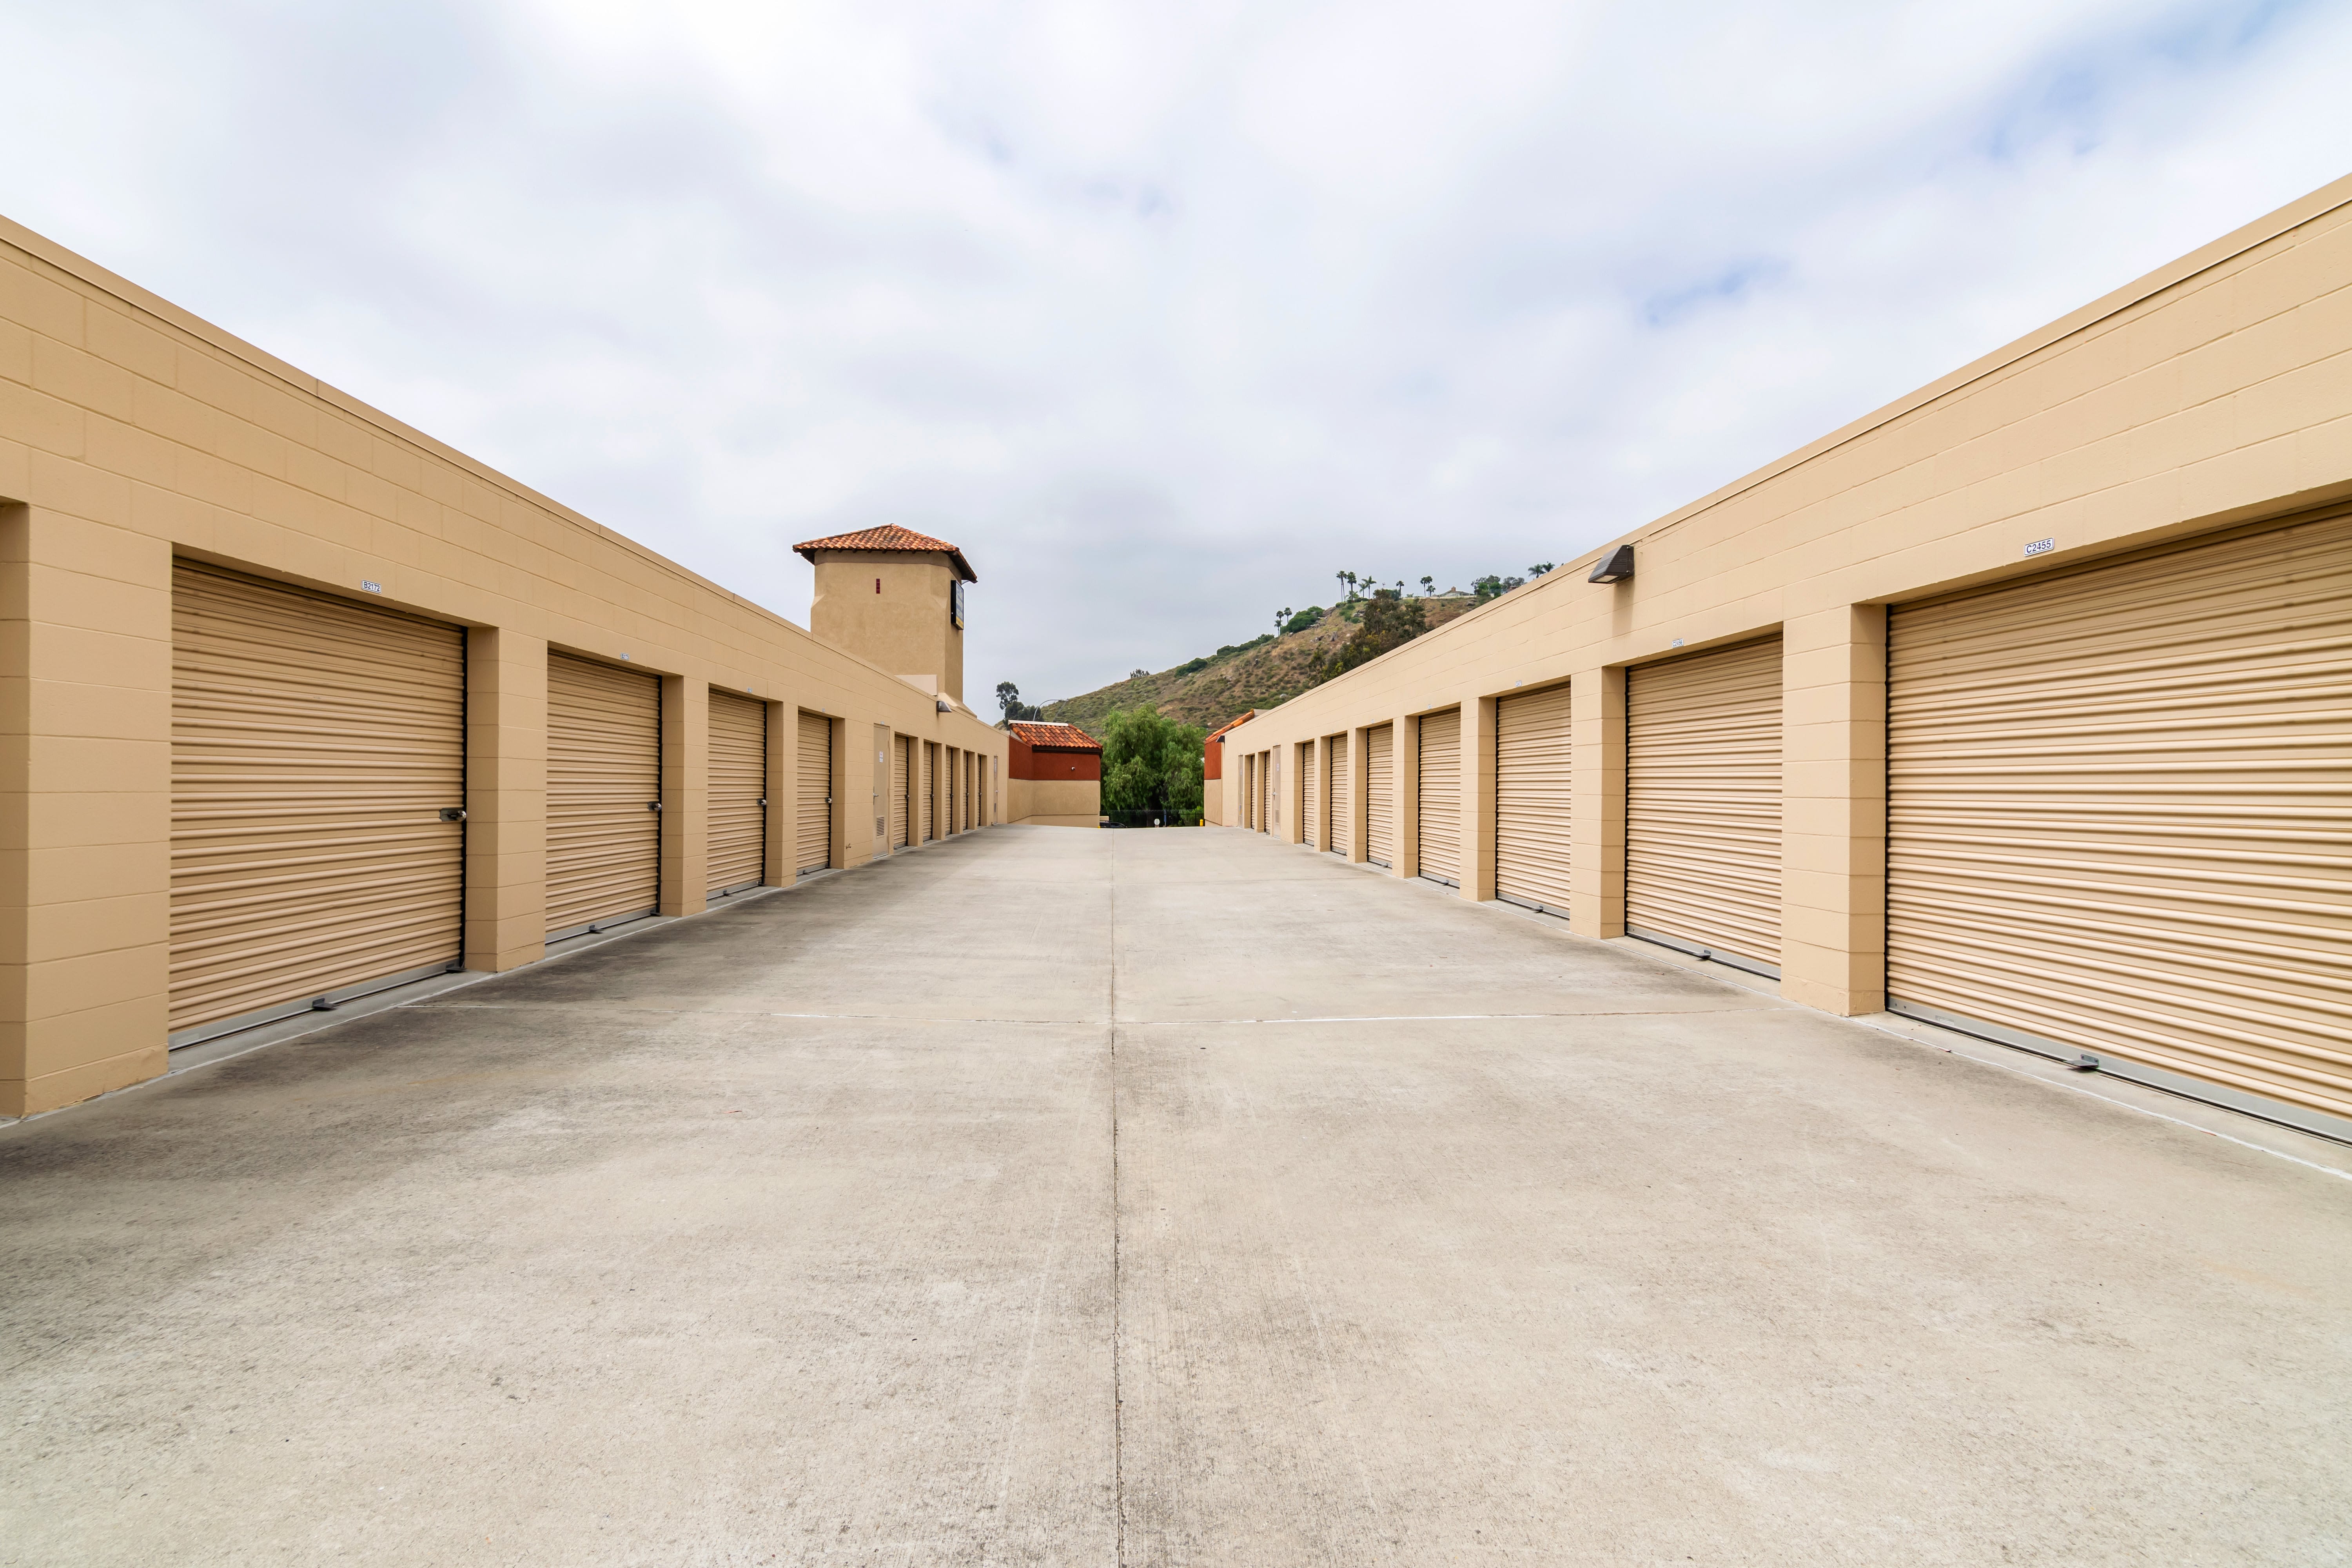 Wide aisle in front of storage units at North County Self Storage in Escondido, CA